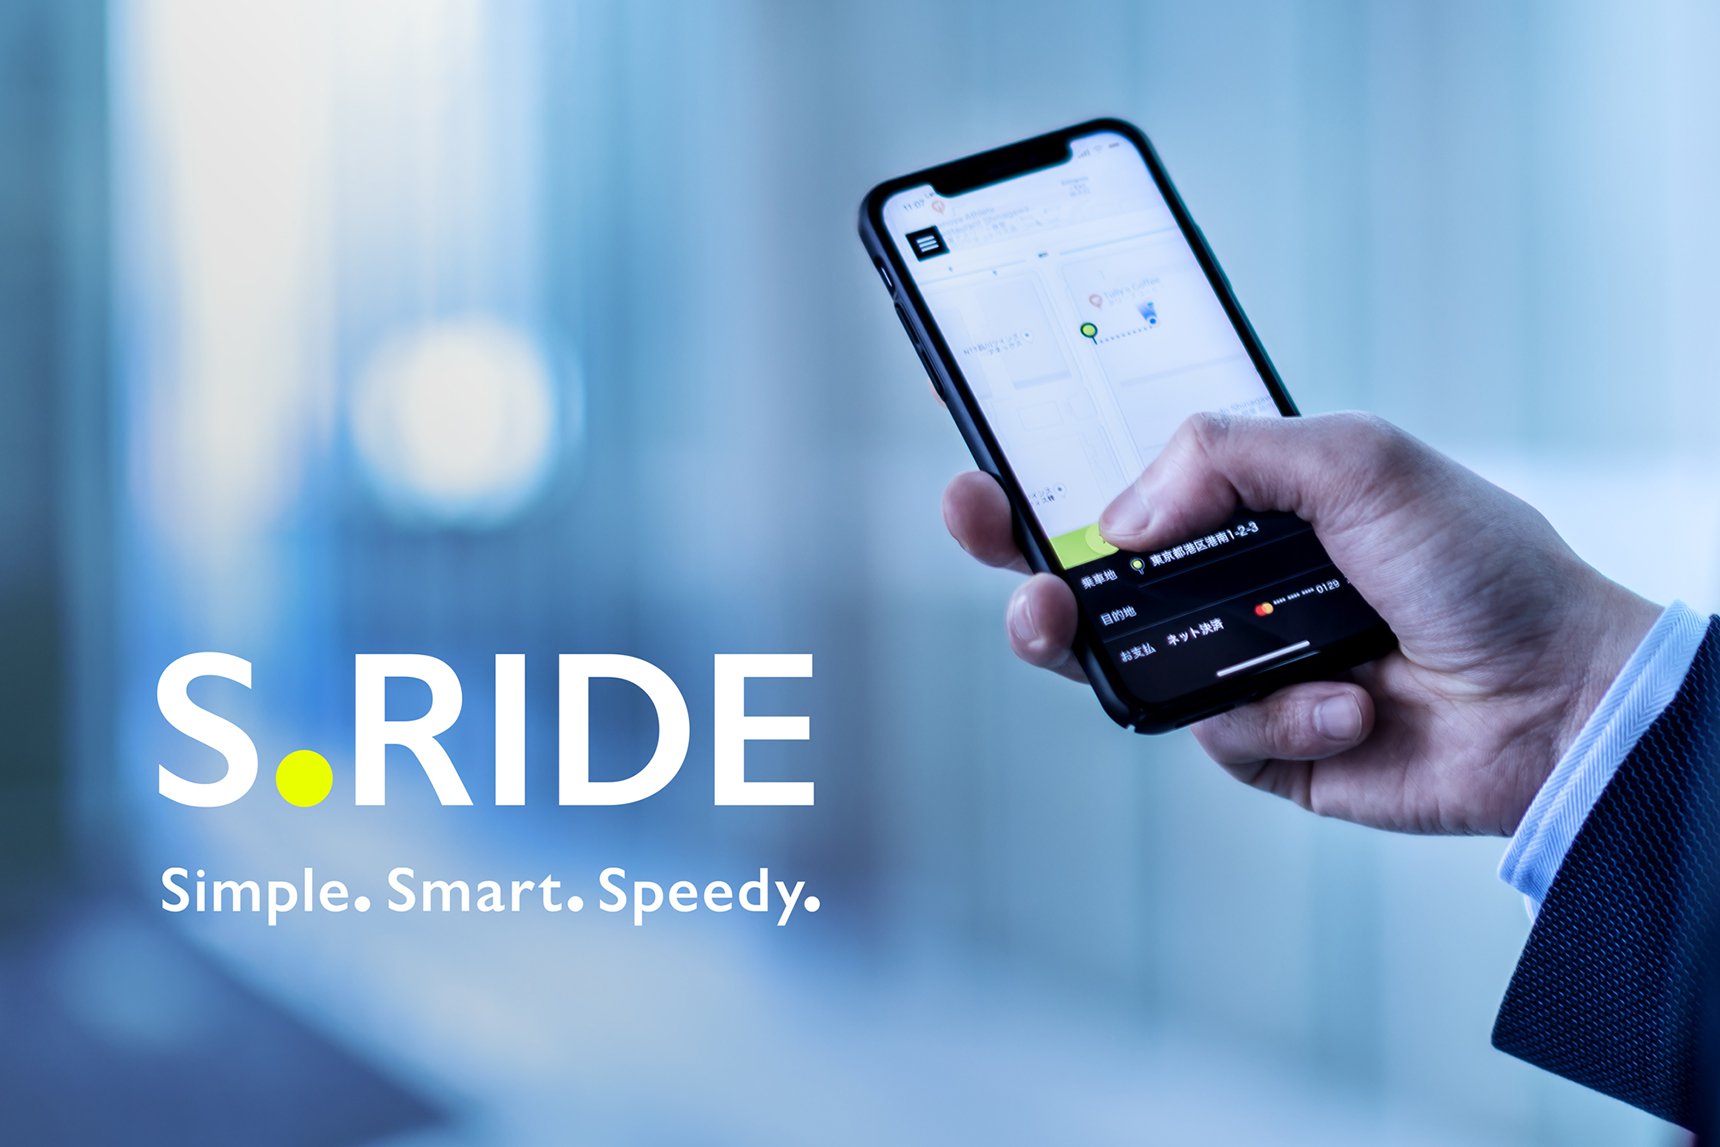 Minnano Taxi Begins Providing Taxi Dispatch Service in Tokyo Tokyo’s Biggest Class Taxi Apps, S.RIDE